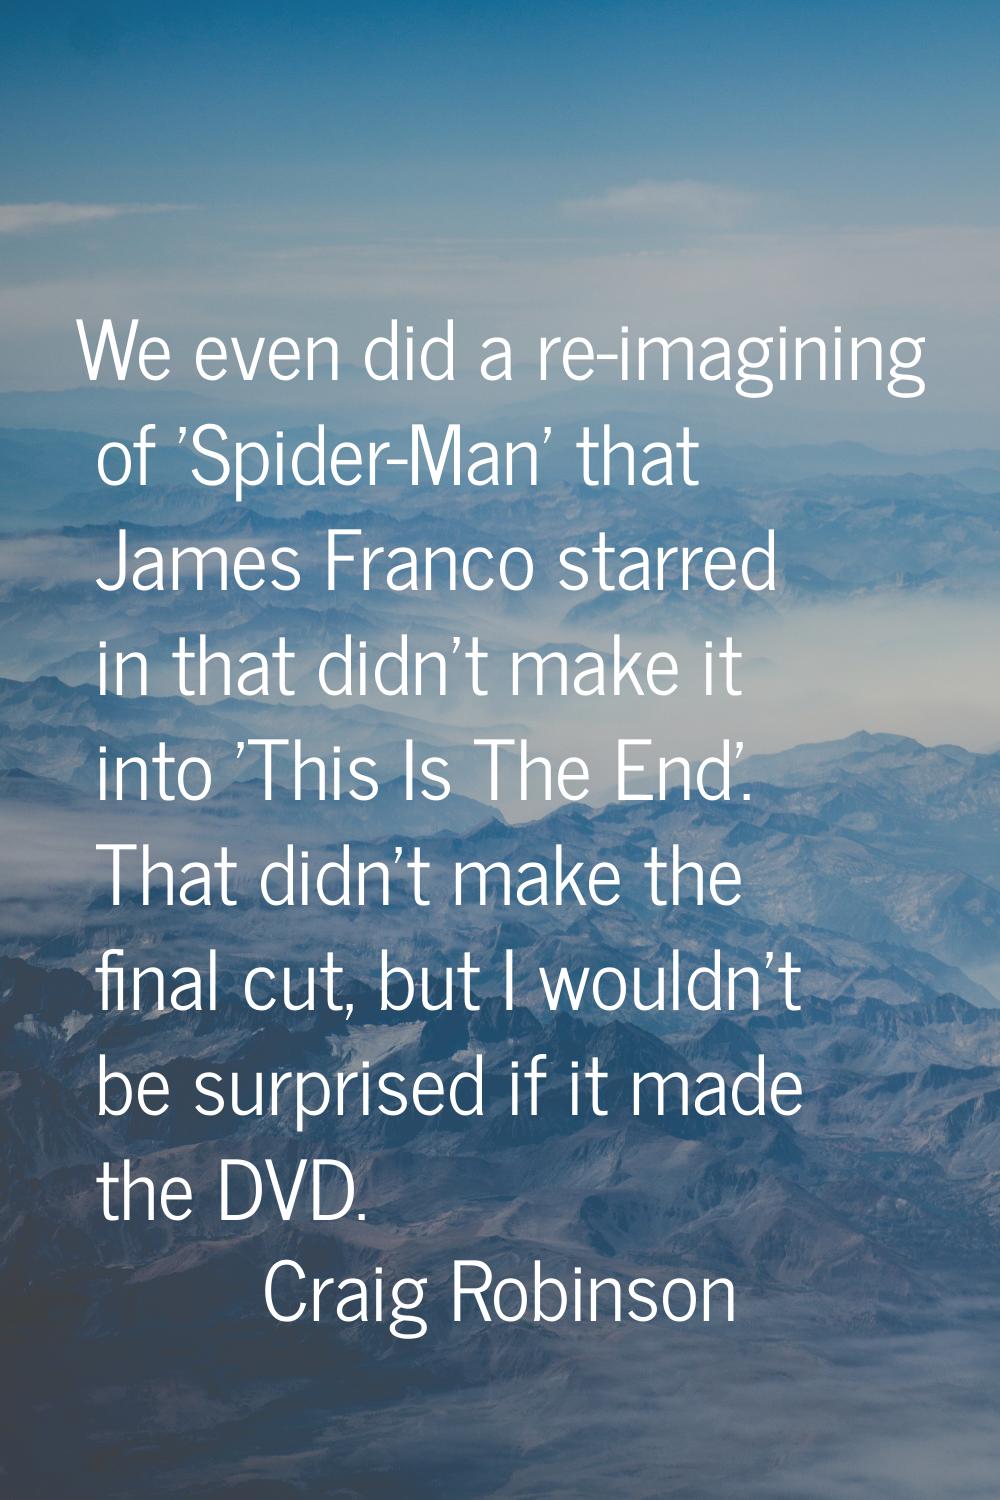 We even did a re-imagining of 'Spider-Man' that James Franco starred in that didn't make it into 'T